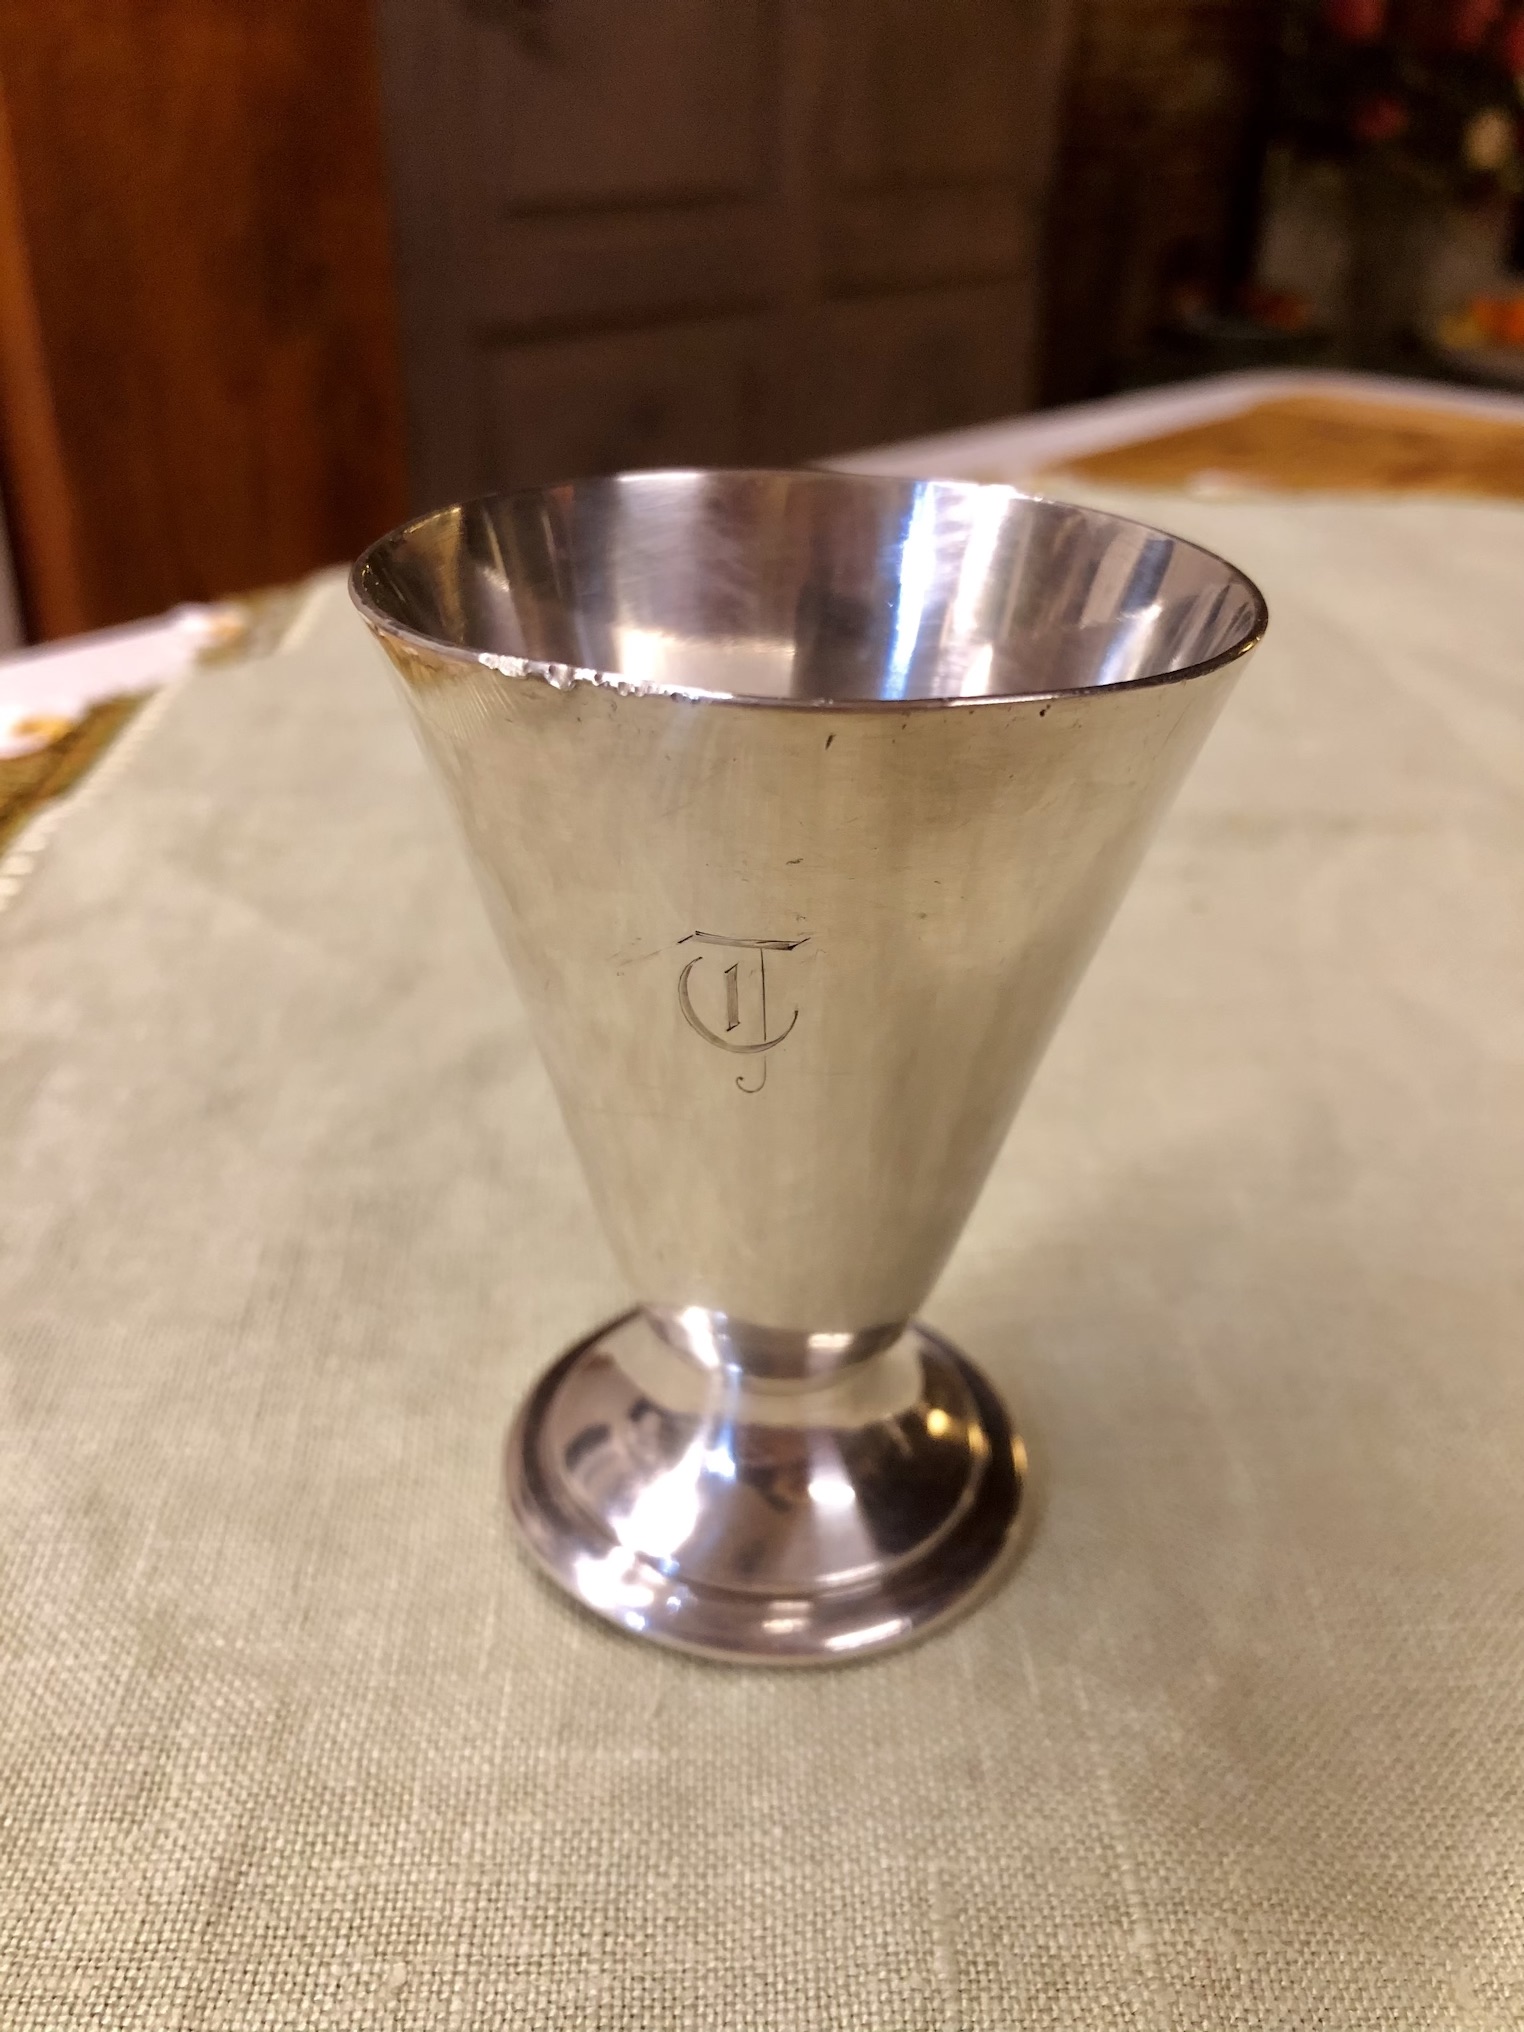 Silver cup with TC initials engraved